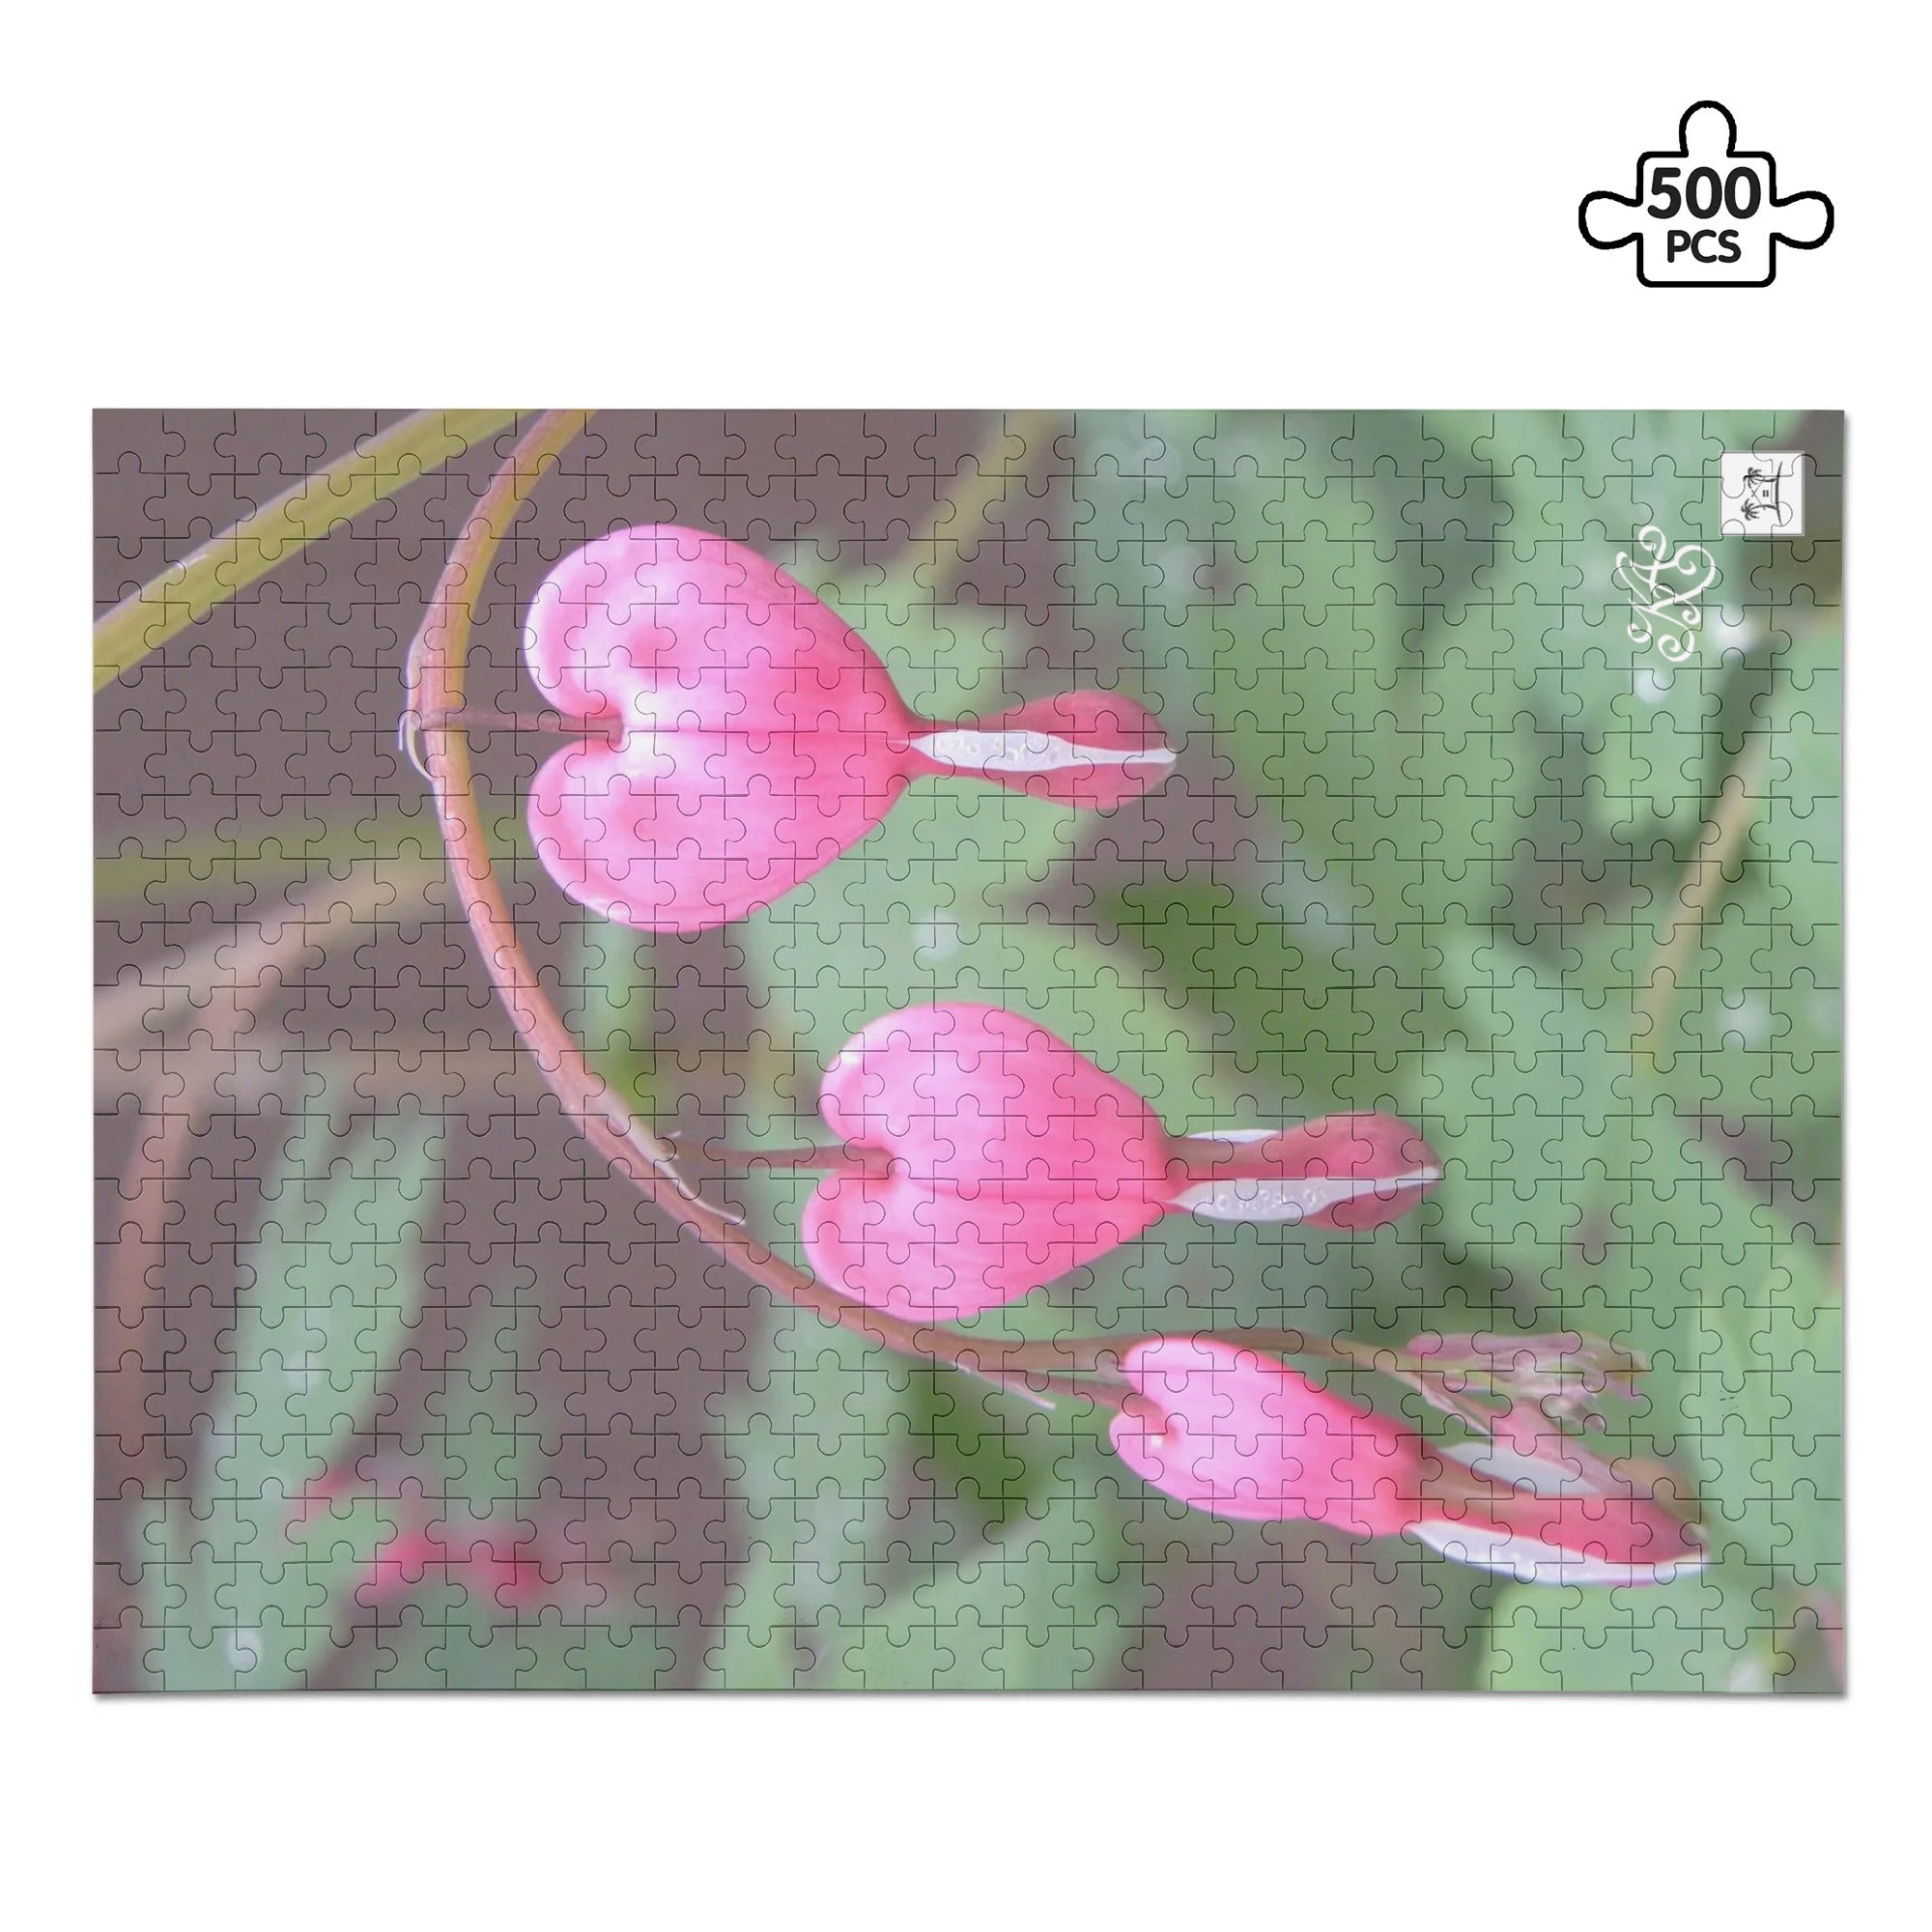 Wooden Jigsaw Puzzle (500 Pcs) - A Chain of Bleeding Hearts